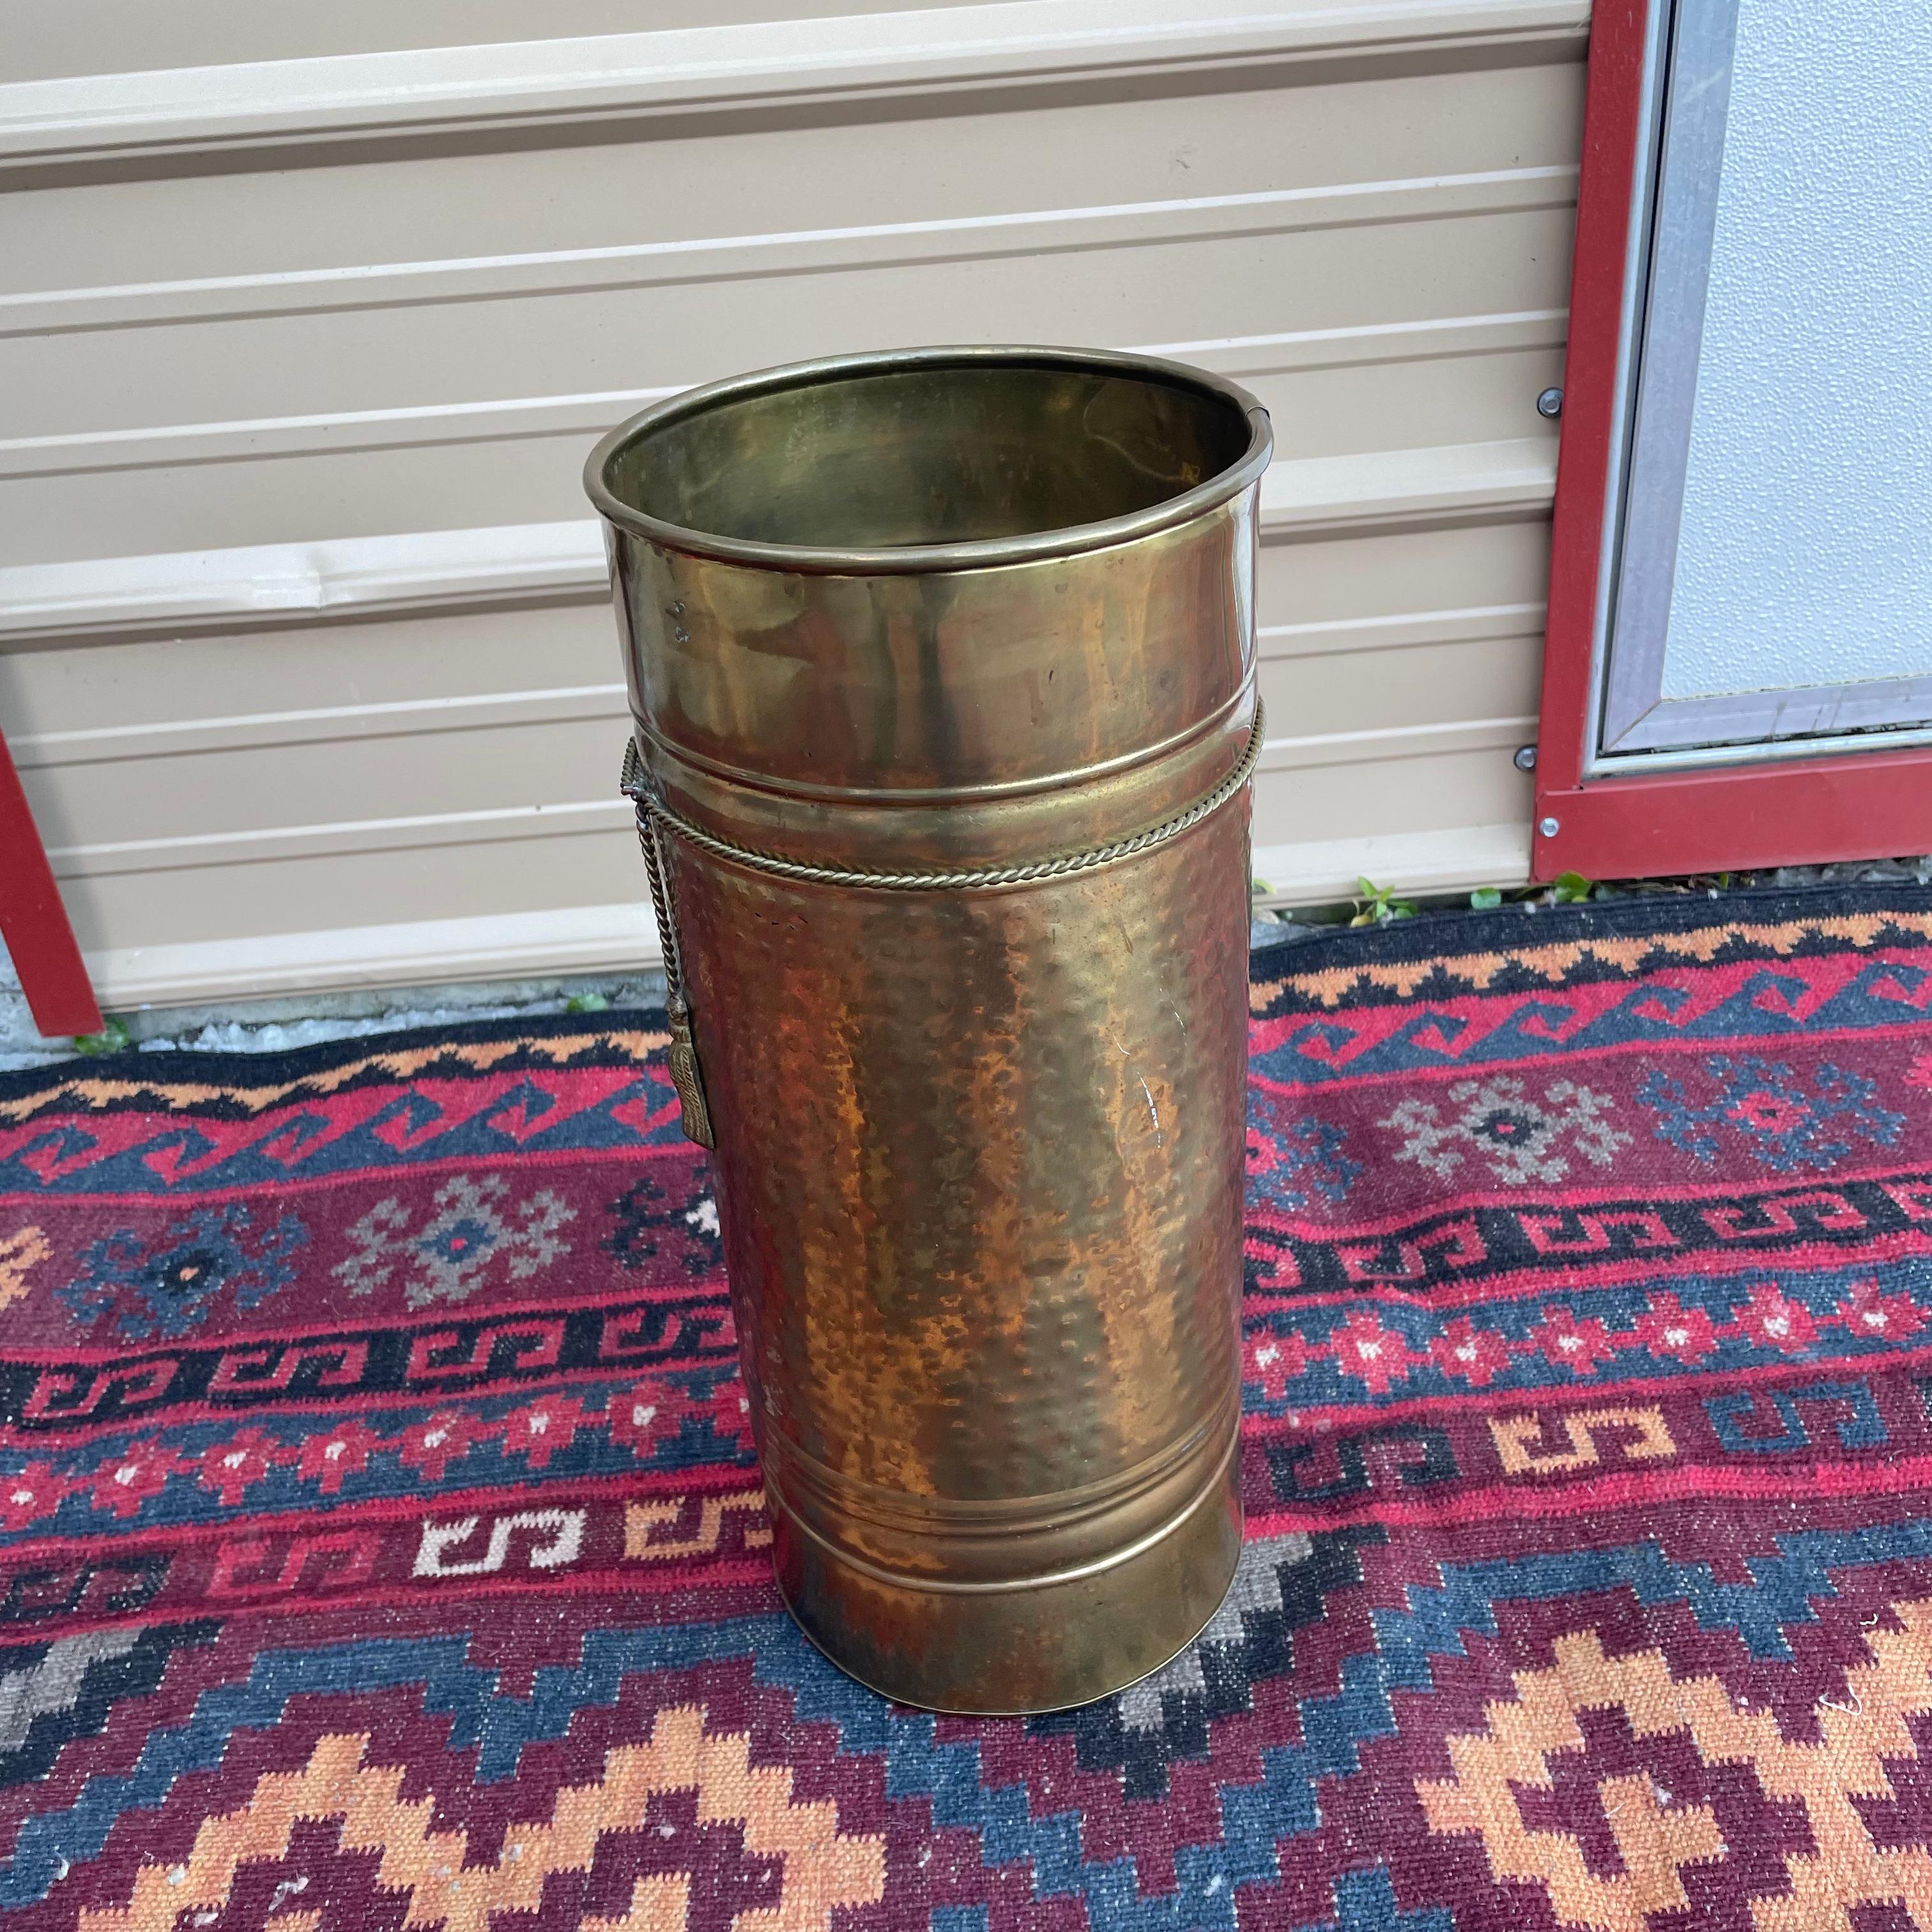 Vintage hammered brass umbrella stand with a draped brass rope design tied around it. In overall good shape. There are some dull spots in the brass finish along with some patina around the rope design. A few small dents. All wear is consistent with